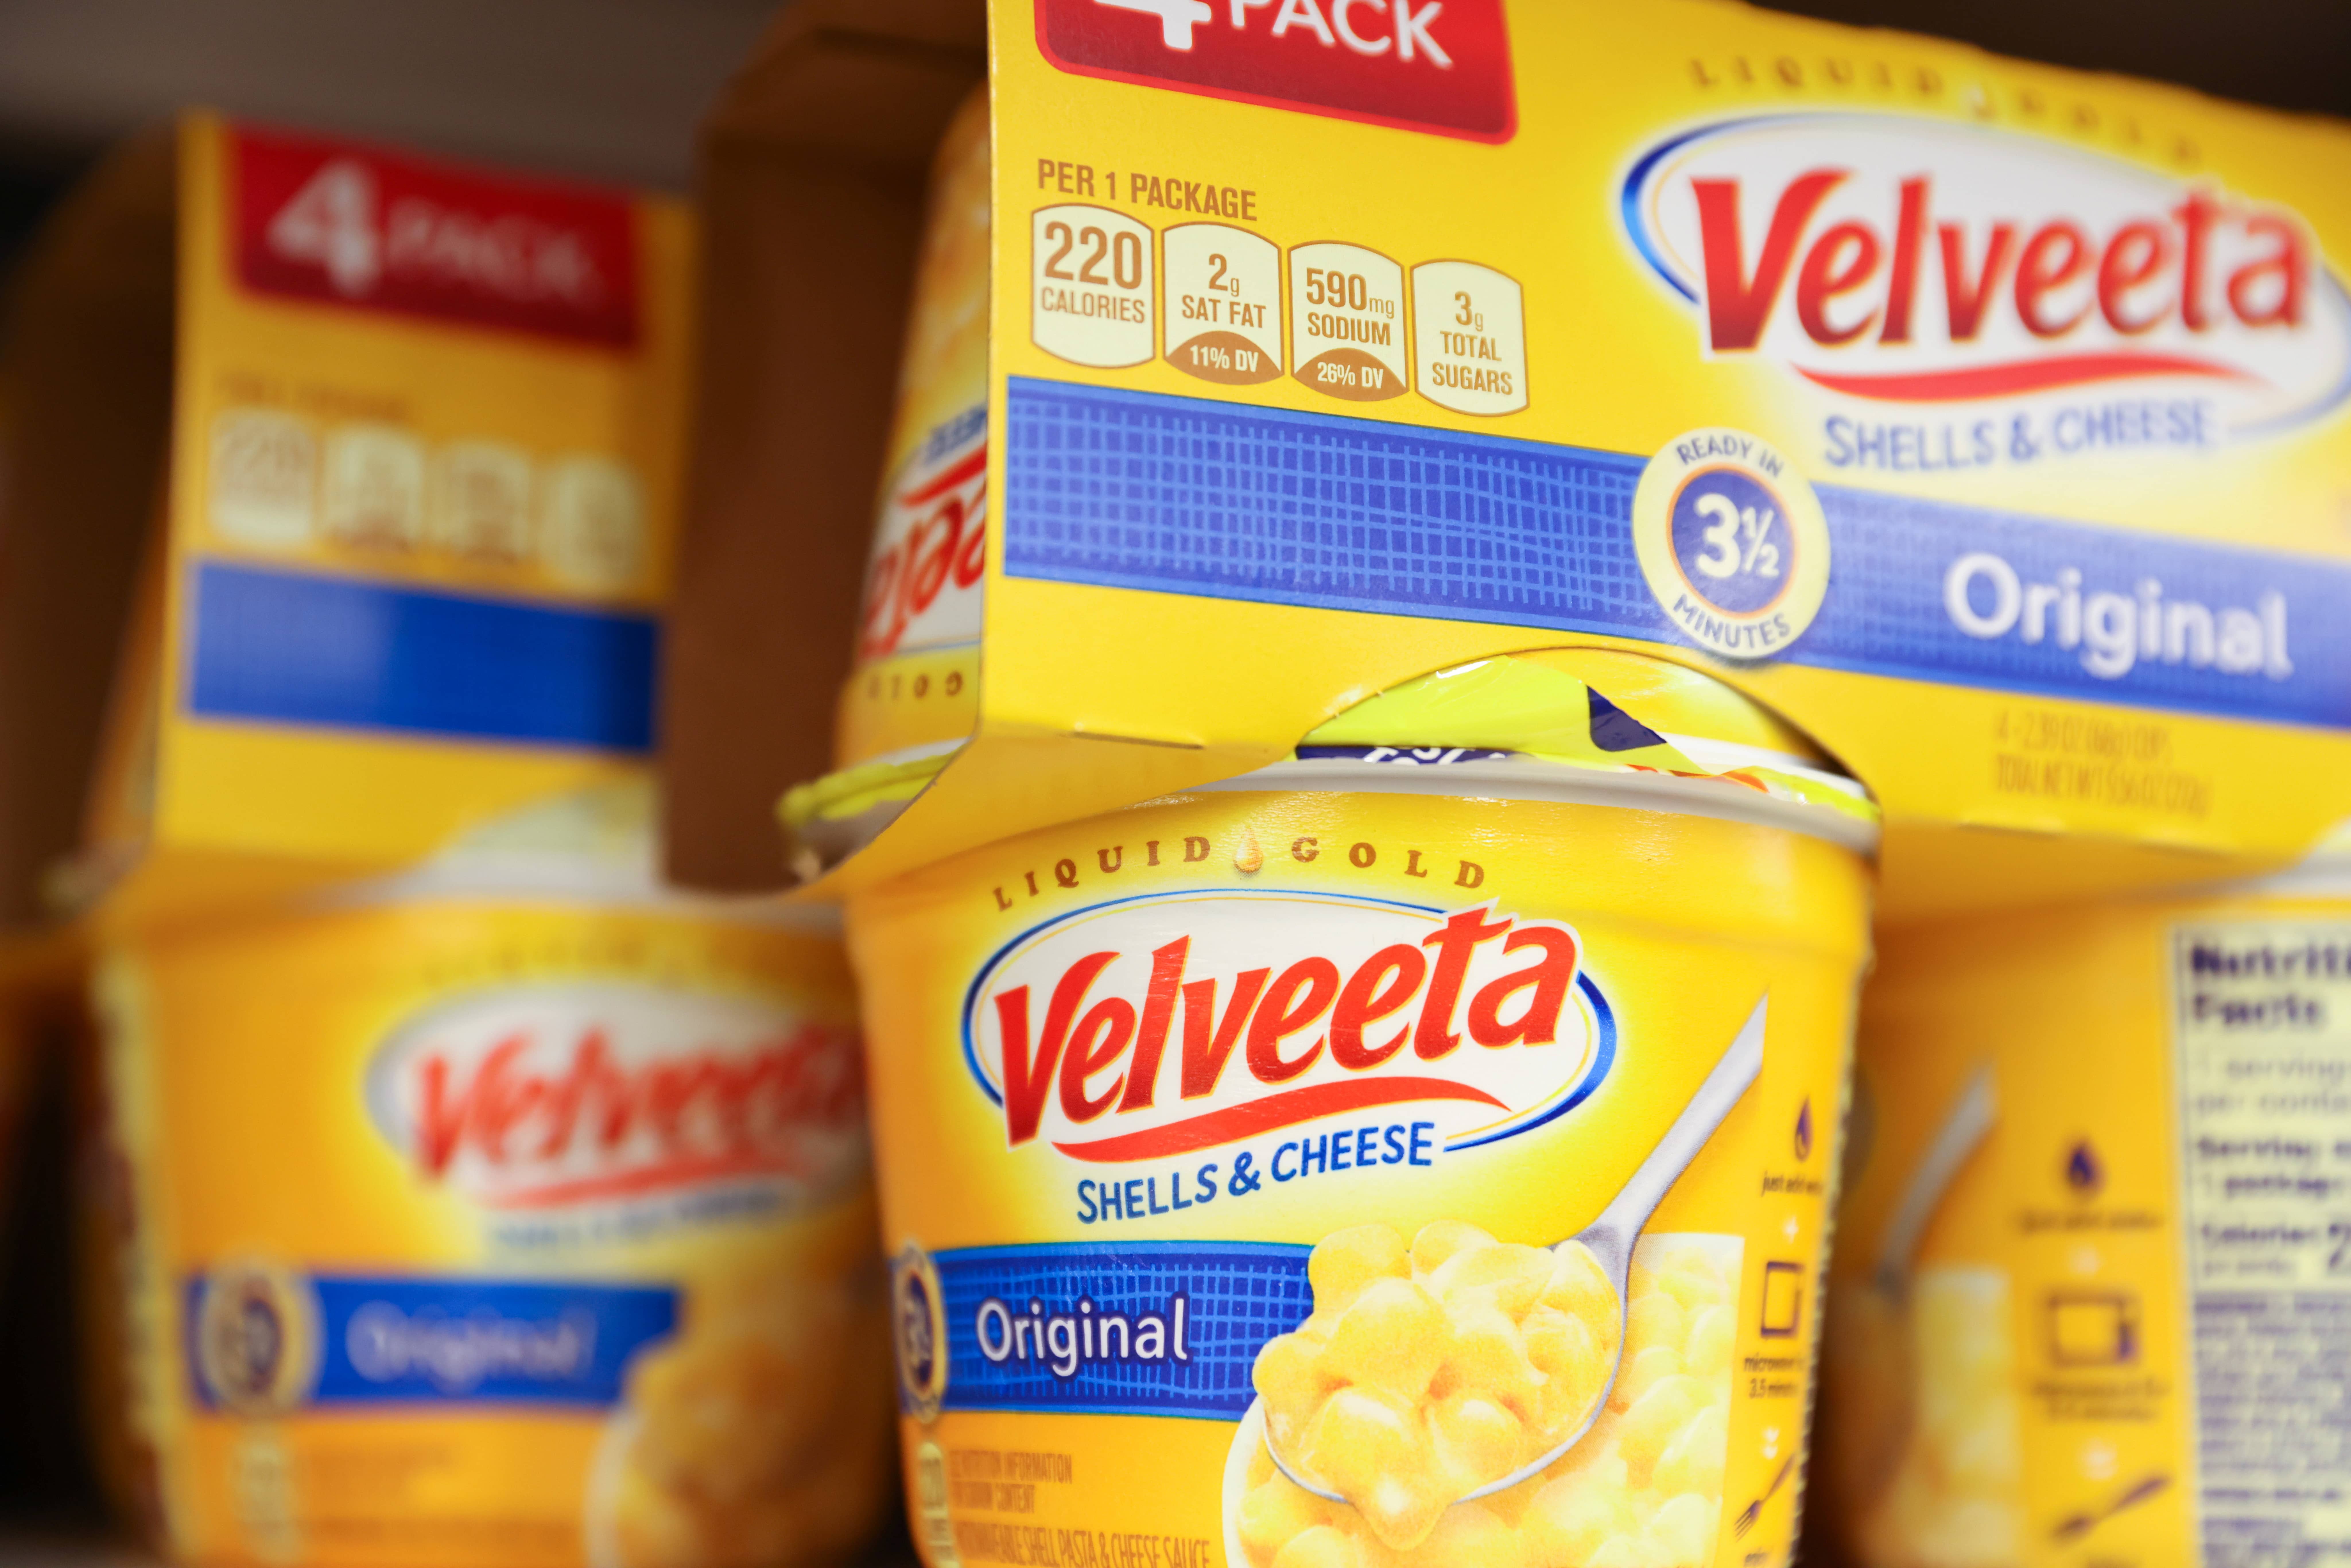 packages-of-velveeta-a-brand-owned-by-the-kraft-heinz-company-are-seen-in-a-store-in-manhattan-new-york